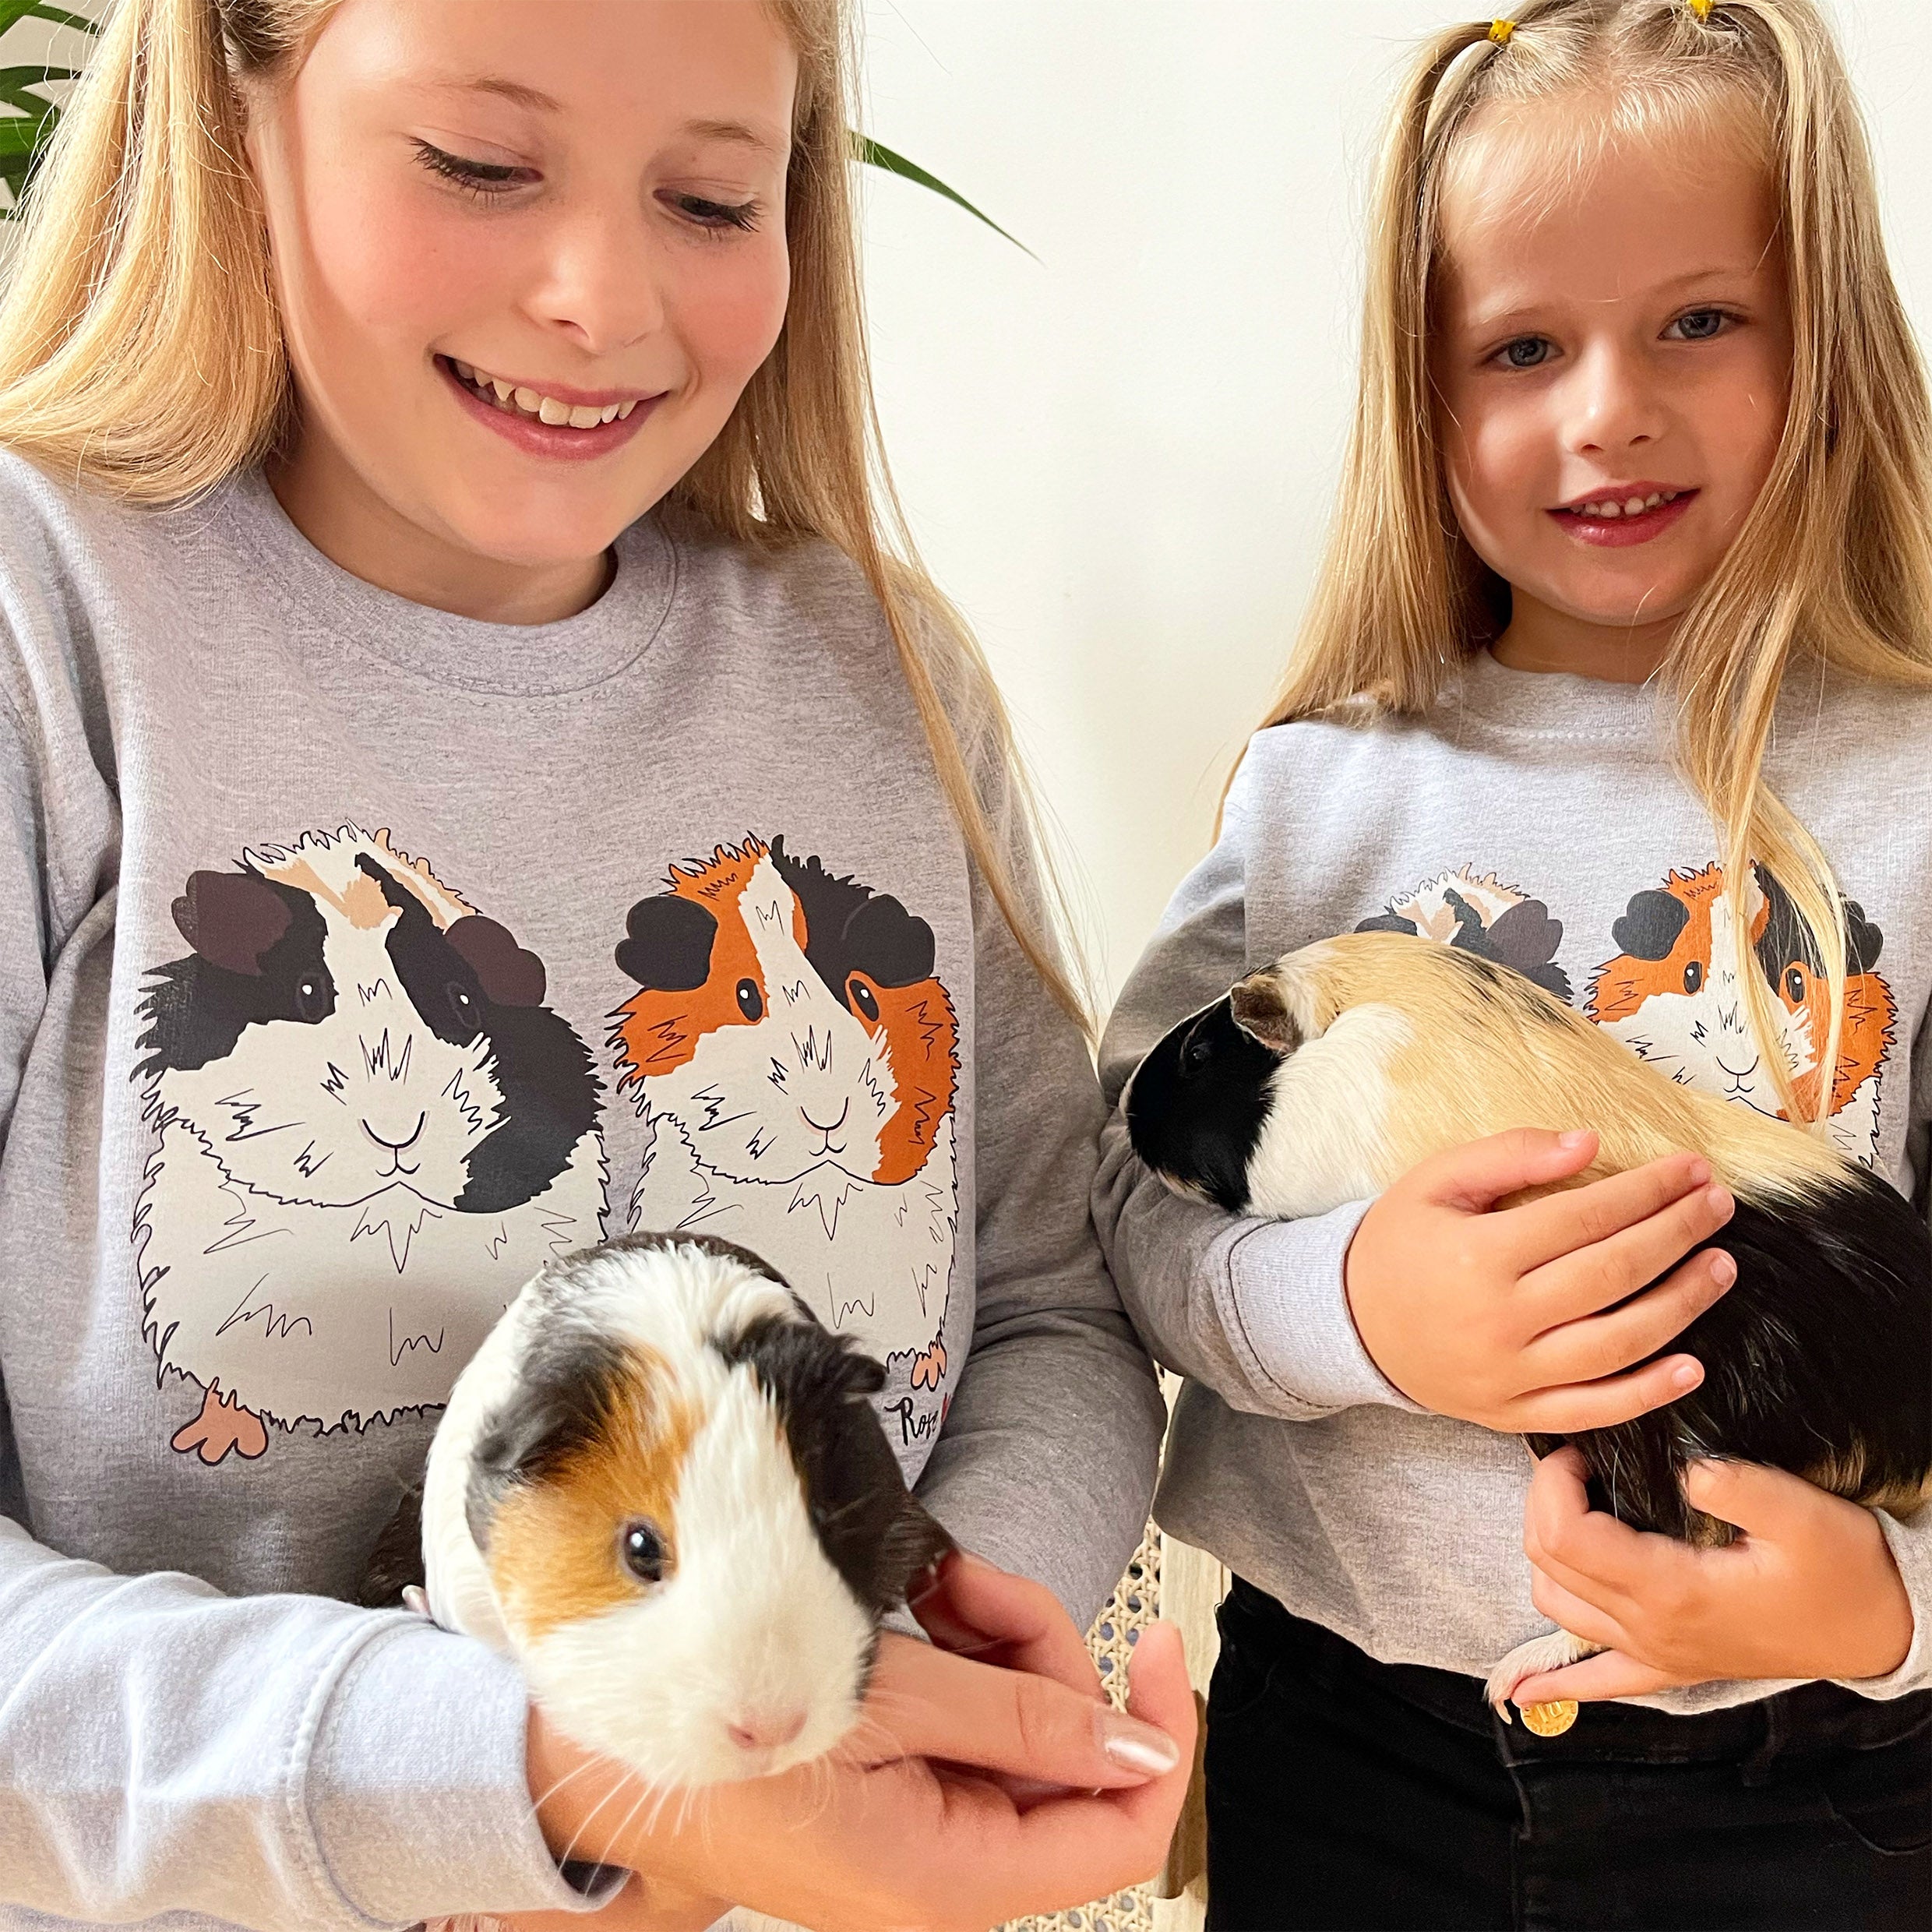 The Personalised Naked Hamster, Rabbit and Guinea pig Jumper